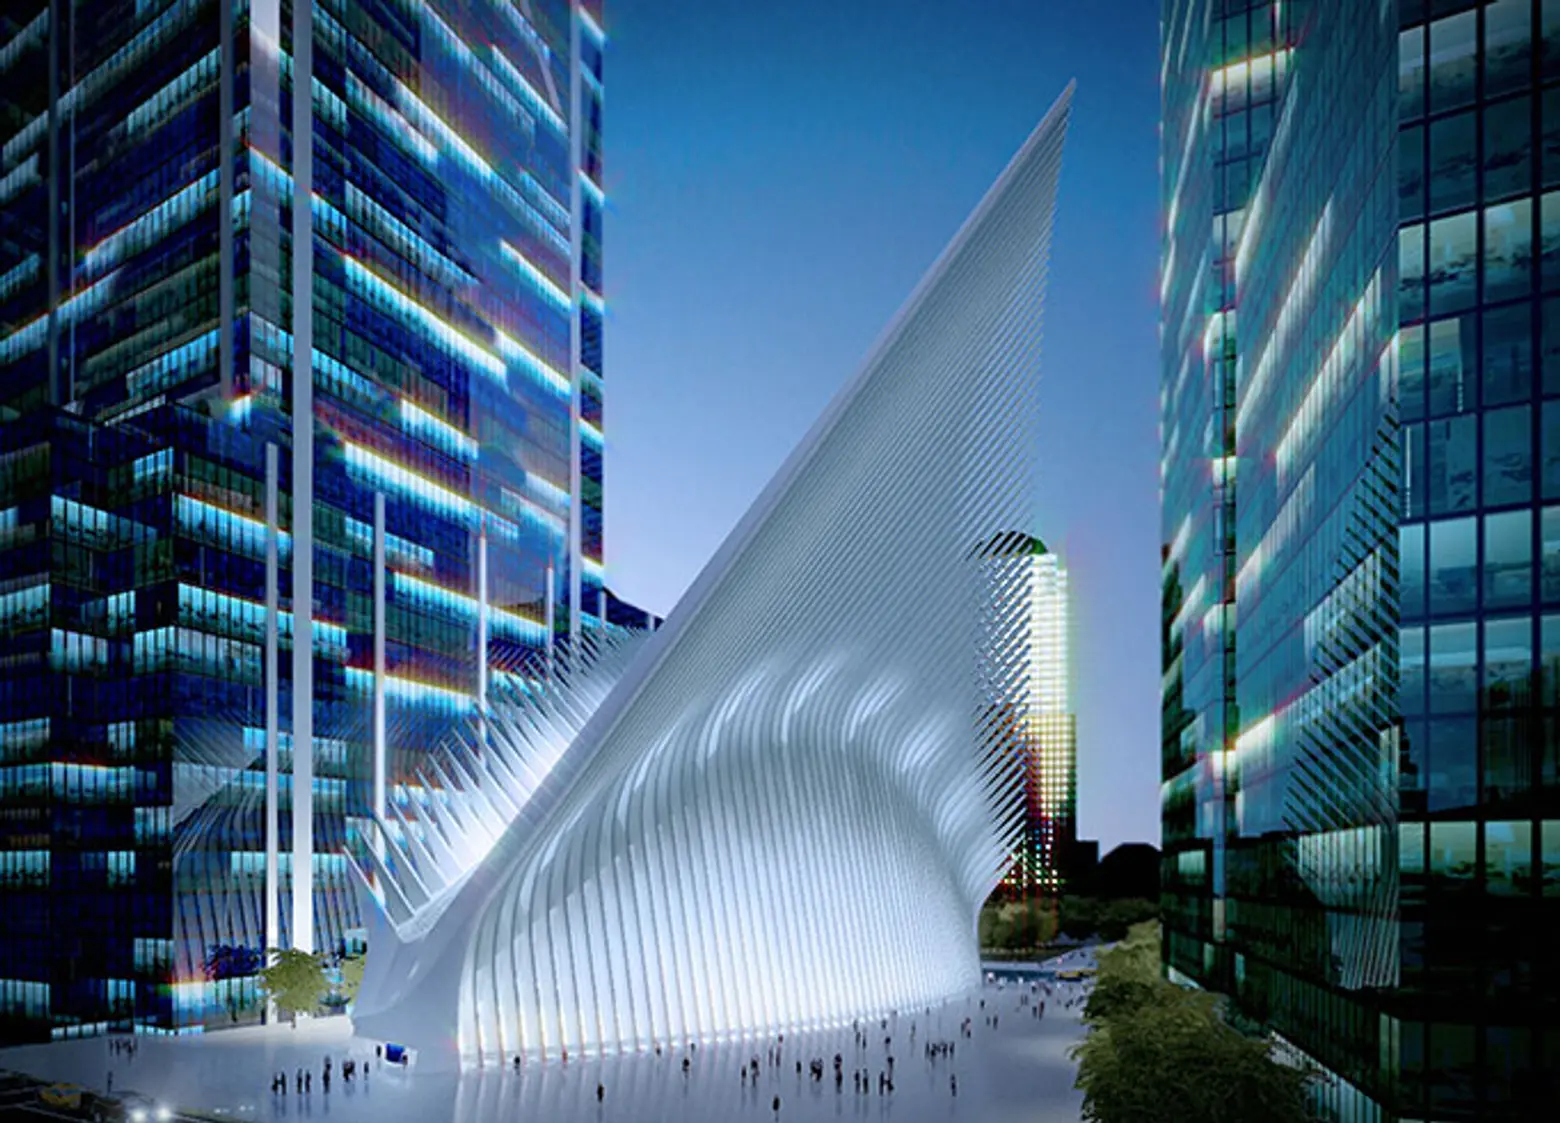 Poll: Do You Agree With the Decision to Forego a Ribbon Cutting for WTC Transportation Hub?